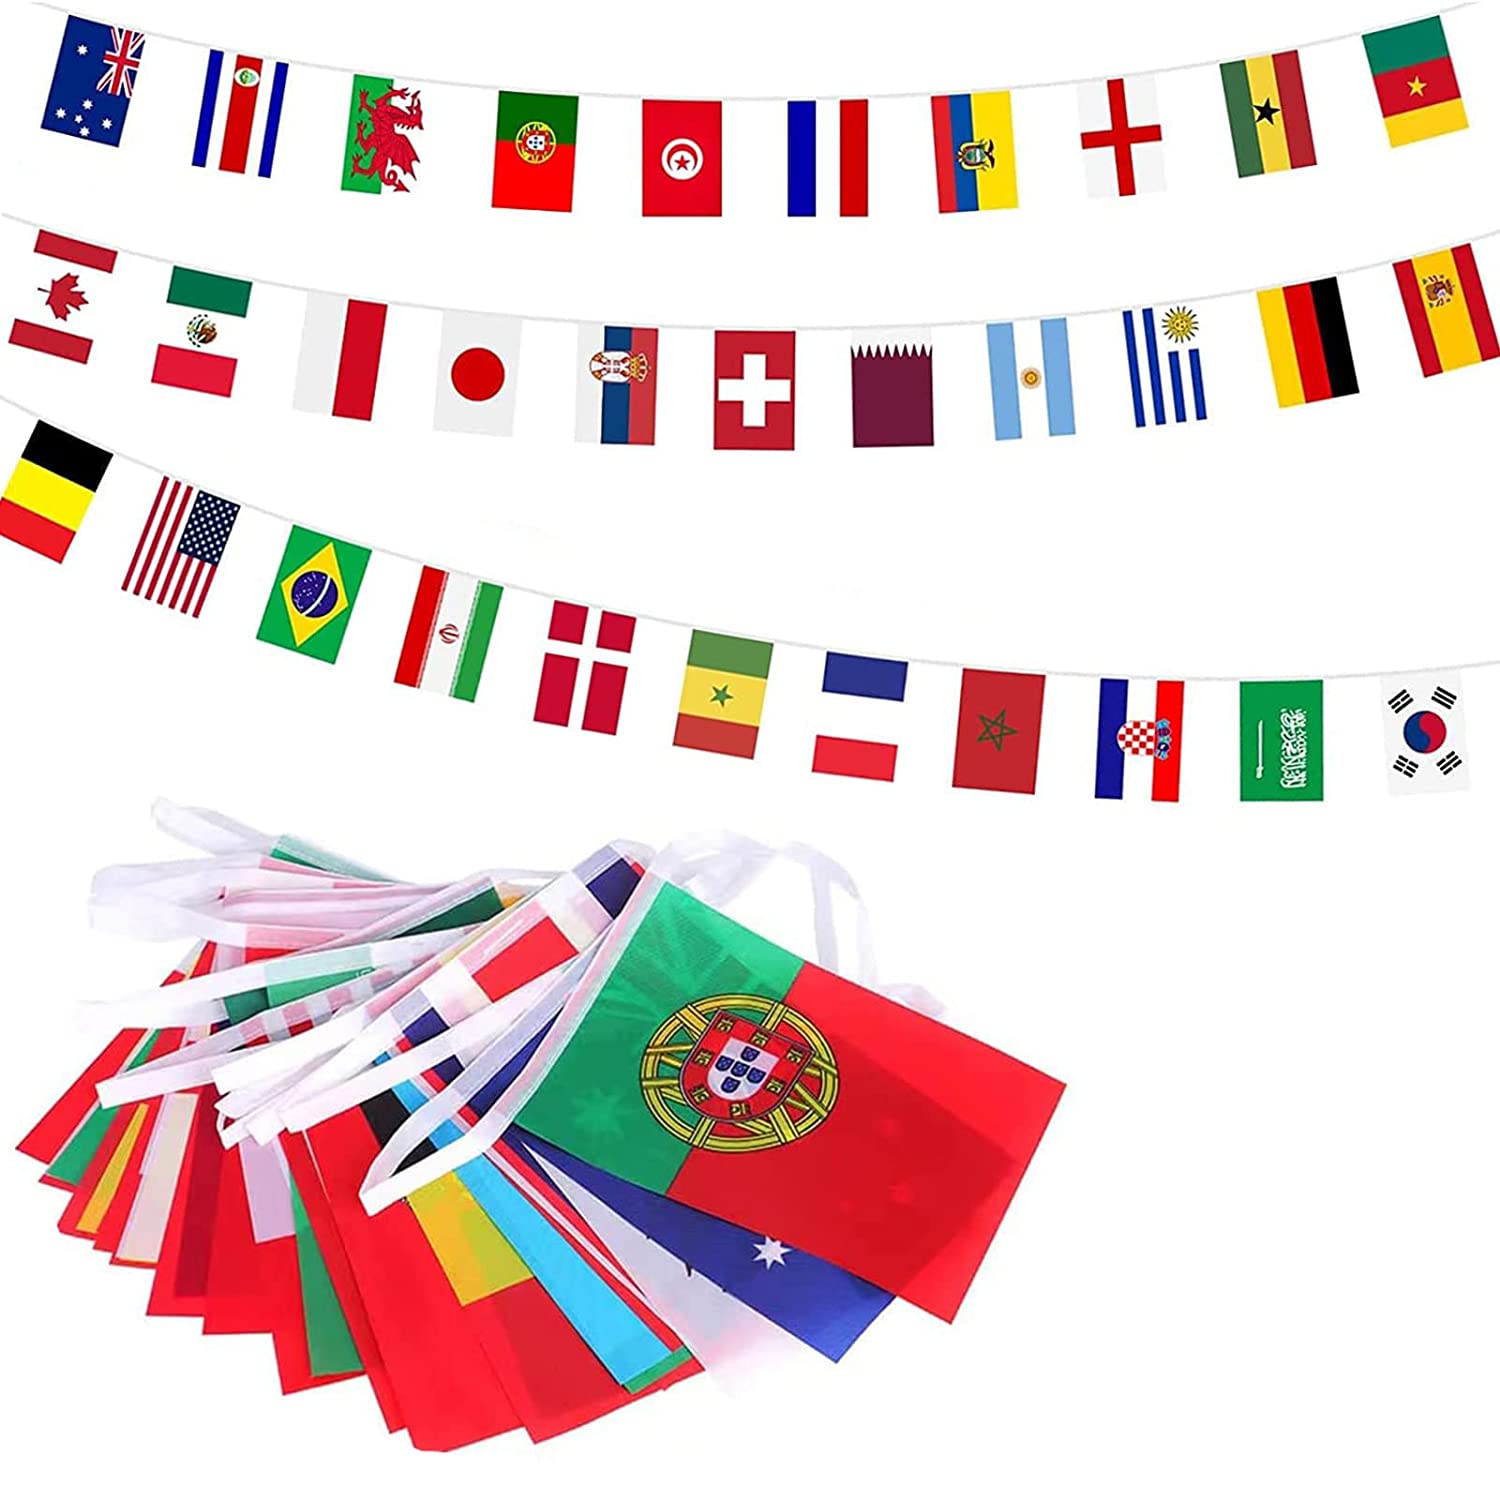 International Flags of the World String Flags Bunting Banner with 64 Country Flags RRP £7 CLEARANCE XL £1.99